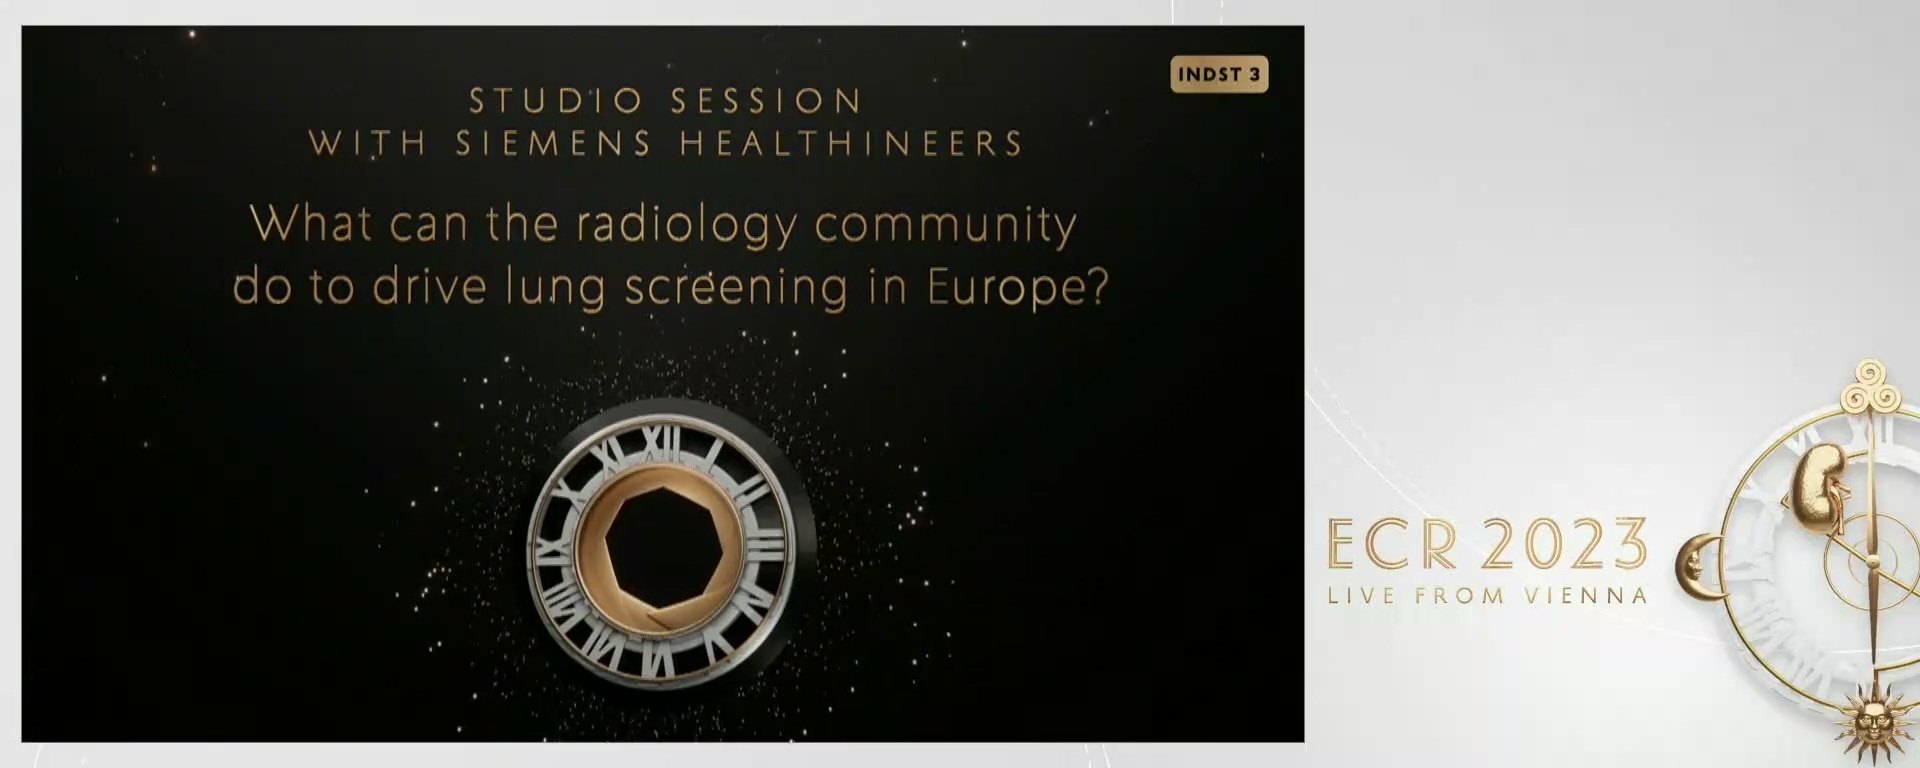 What can the radiology community do to drive lung screening in Europe?